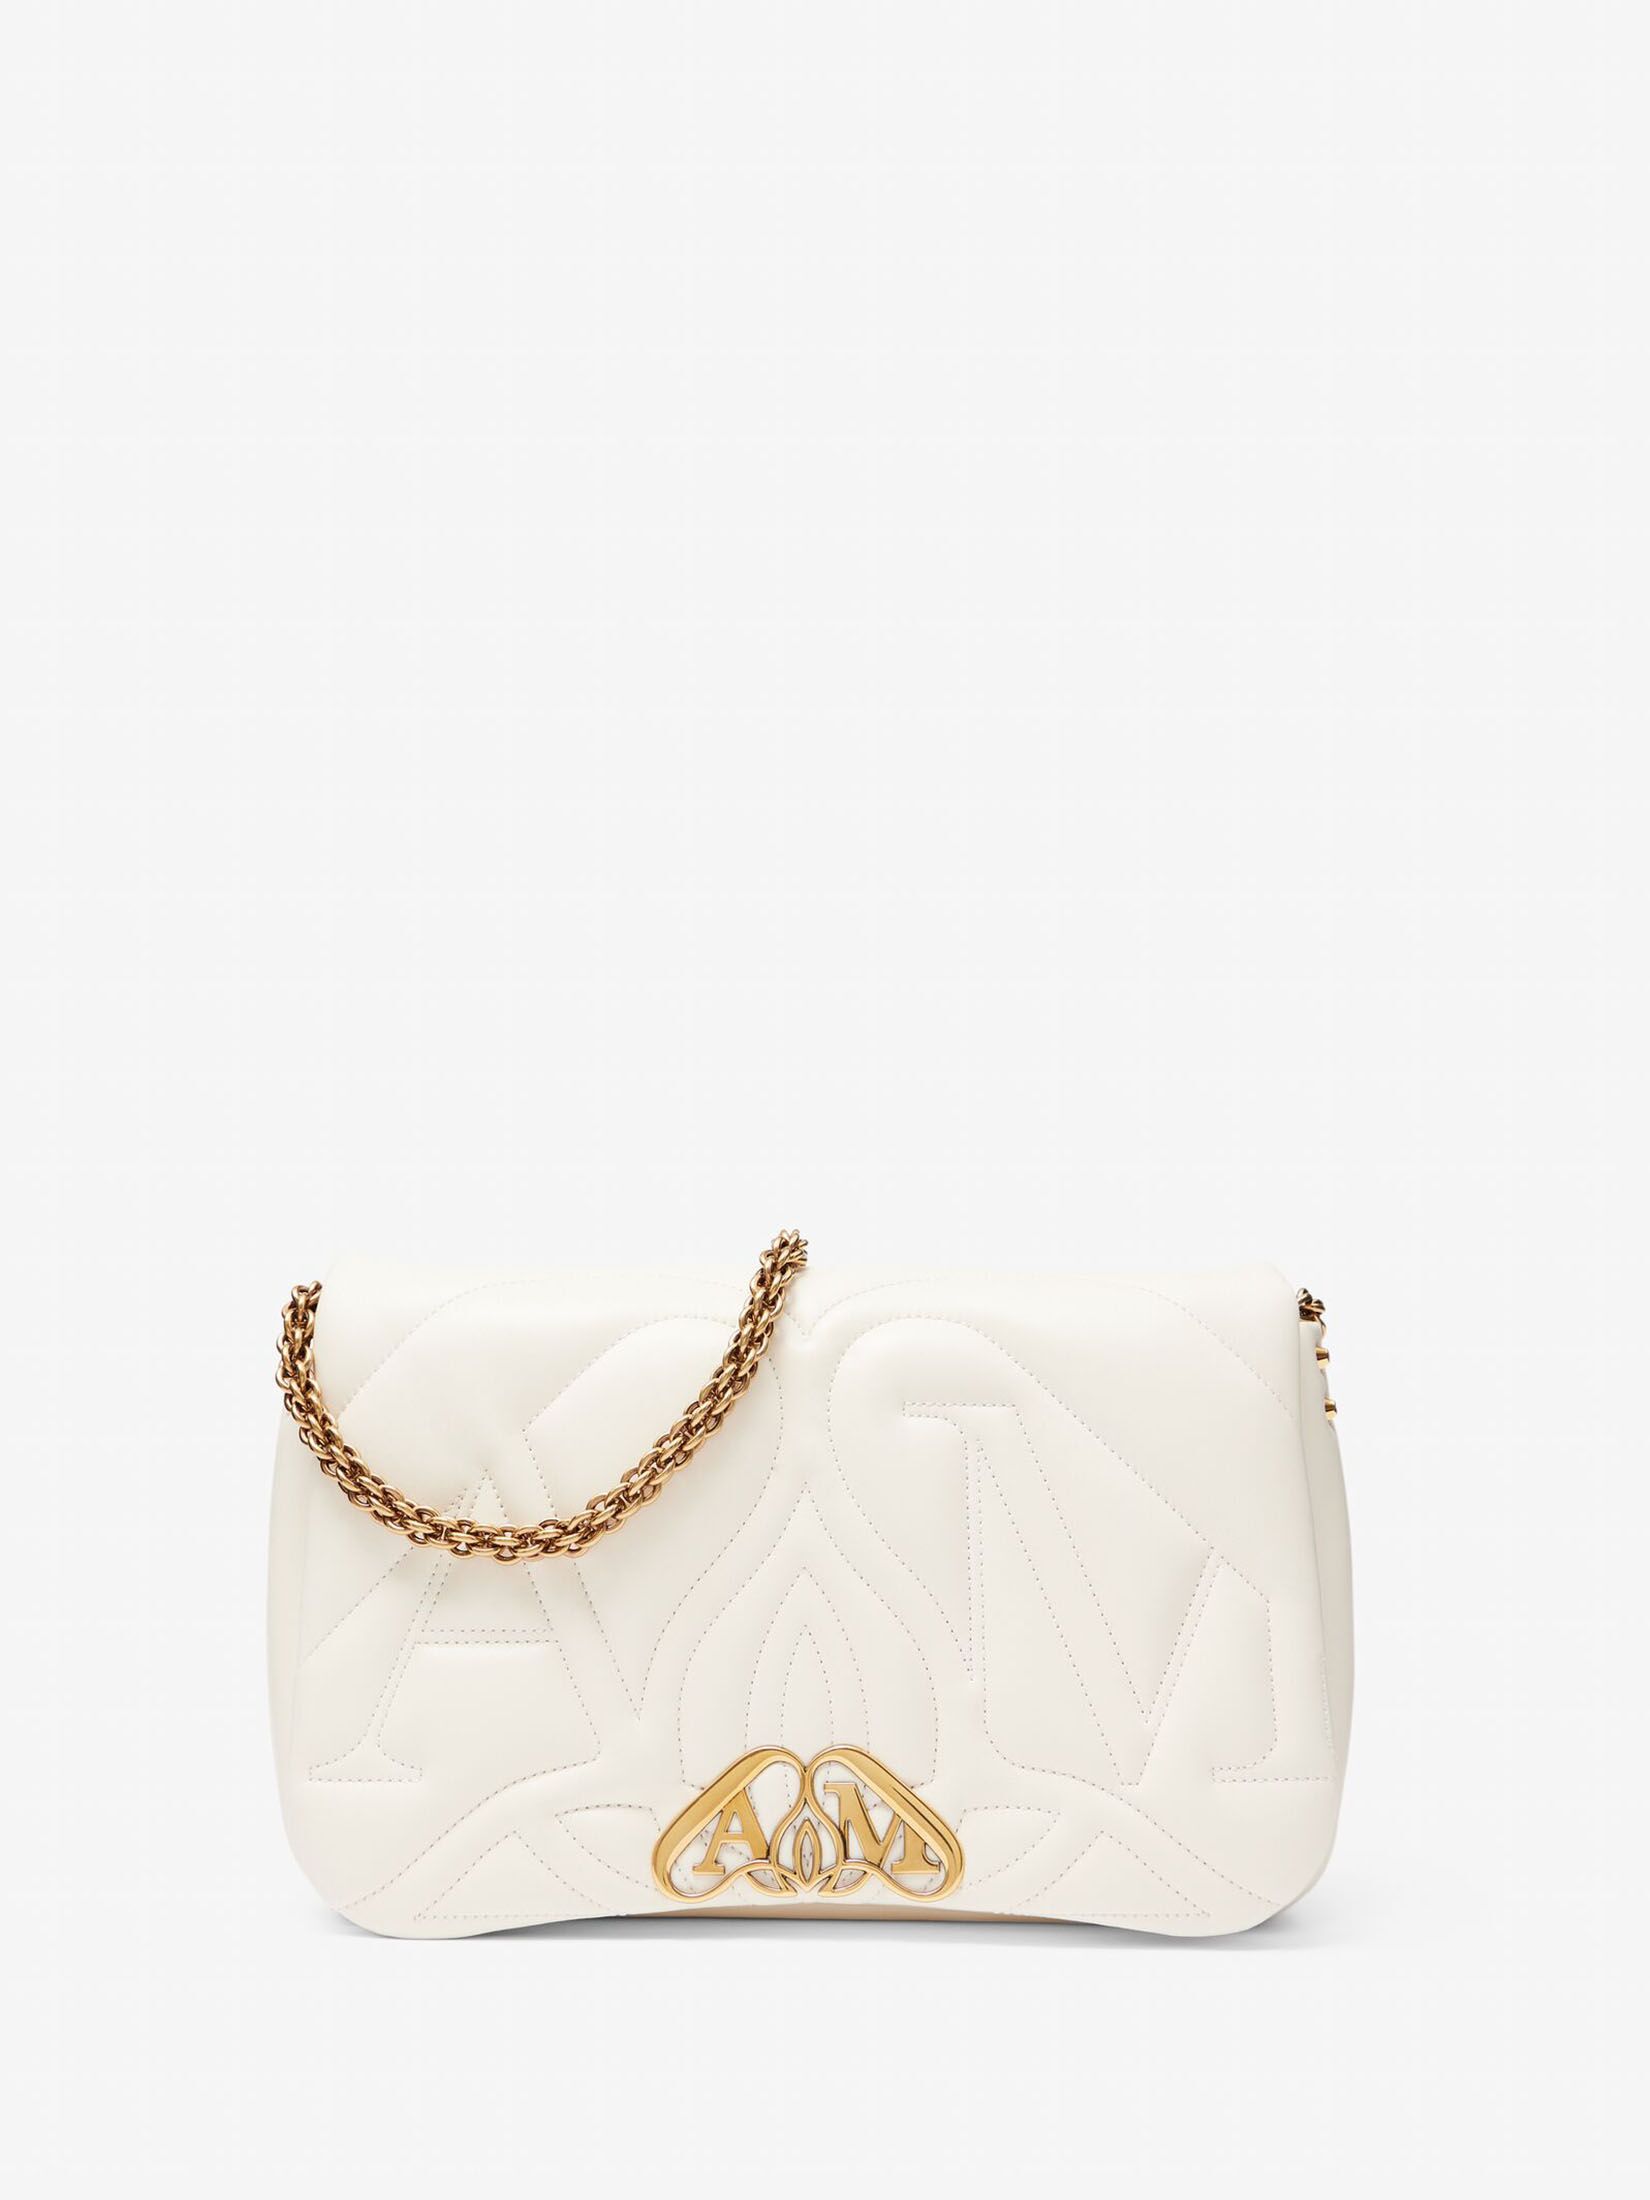 The Seal Bag in Soft ivory